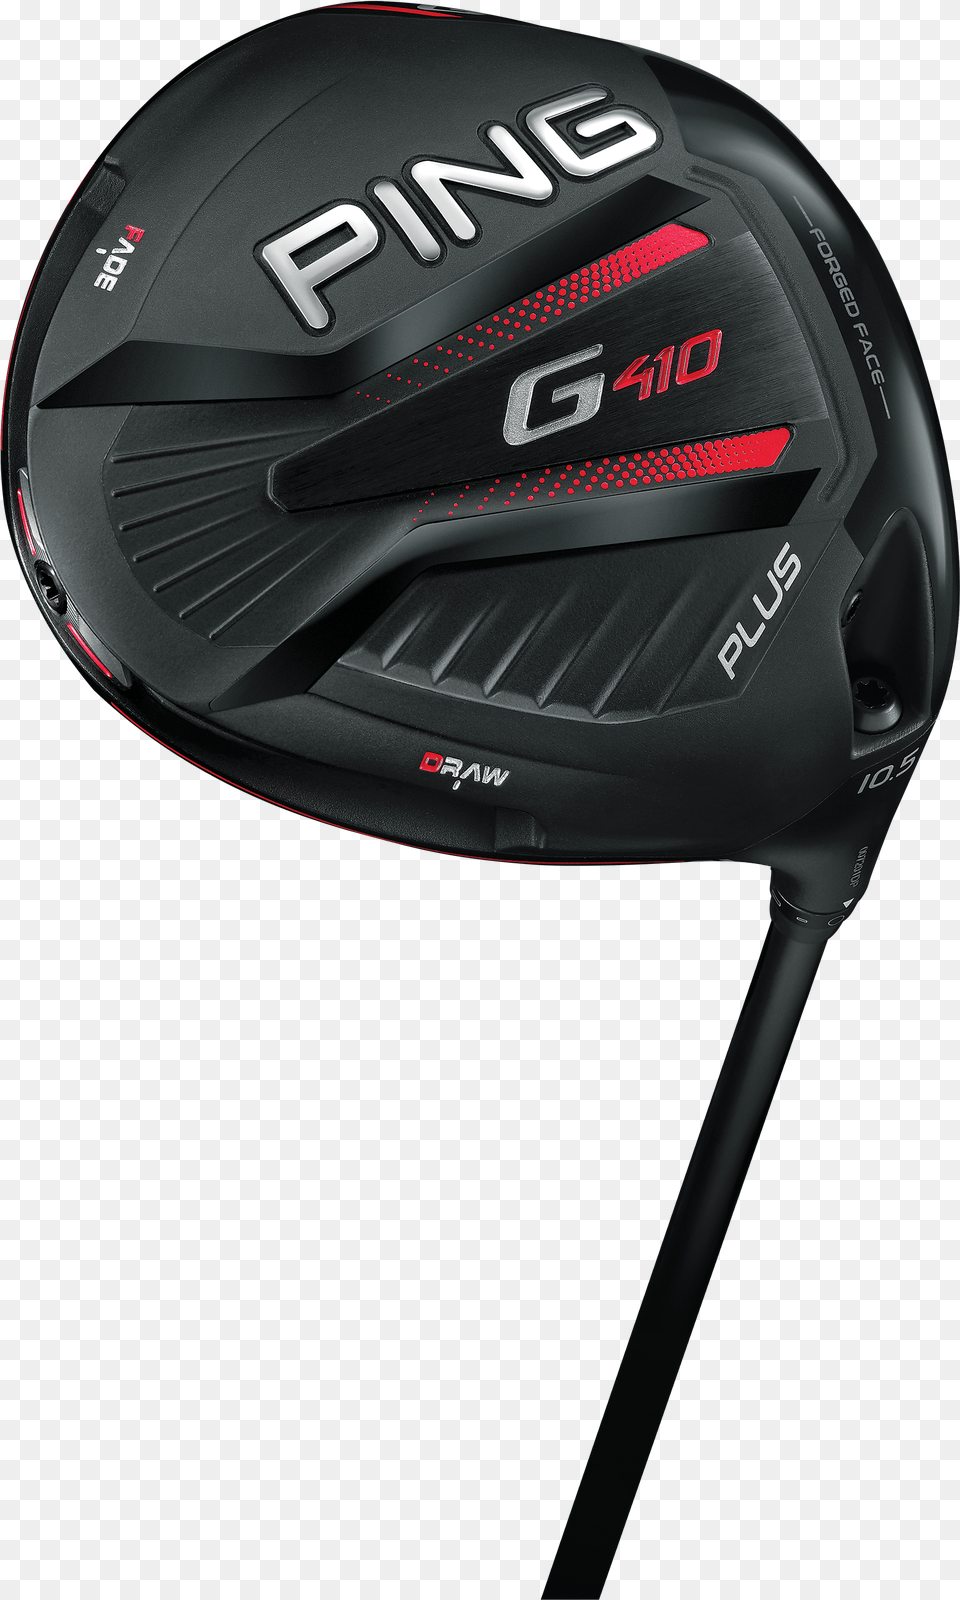 New Ping G410 Driver Adds Adjustable Center Of Gravity With, Golf, Golf Club, Sport, Putter Free Transparent Png